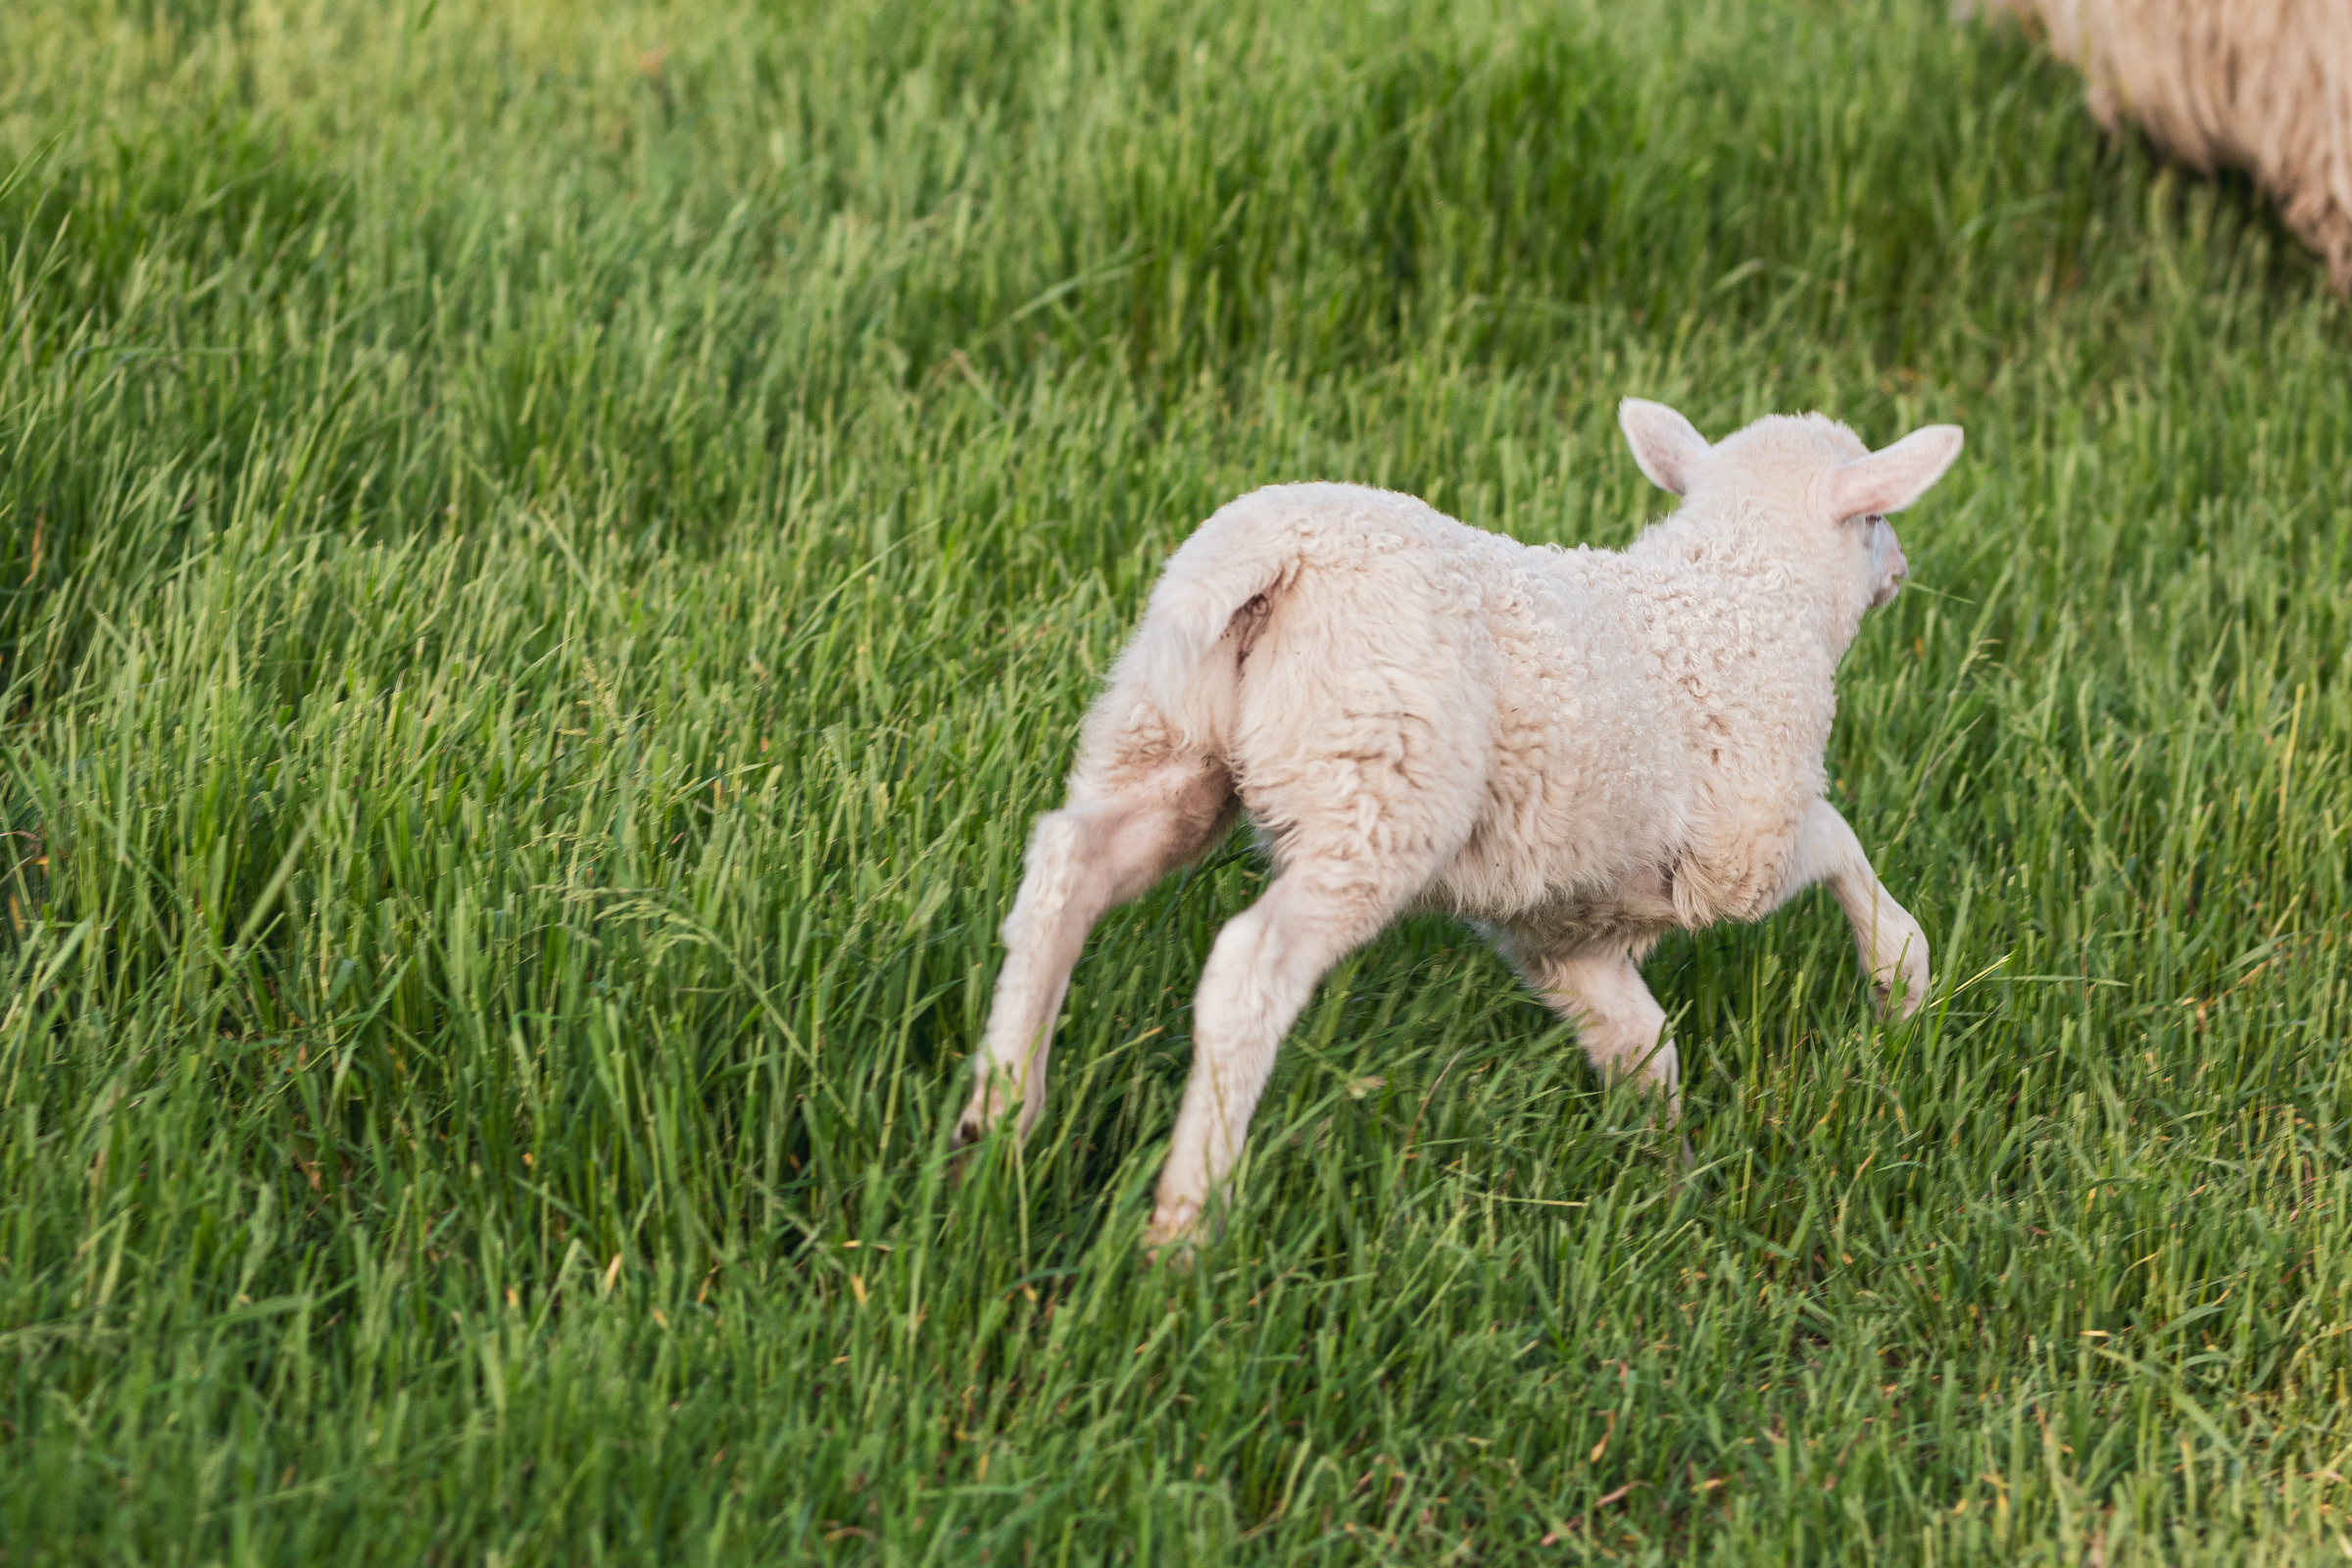 A young sheep on a green field running away from the camera and out of the frame.